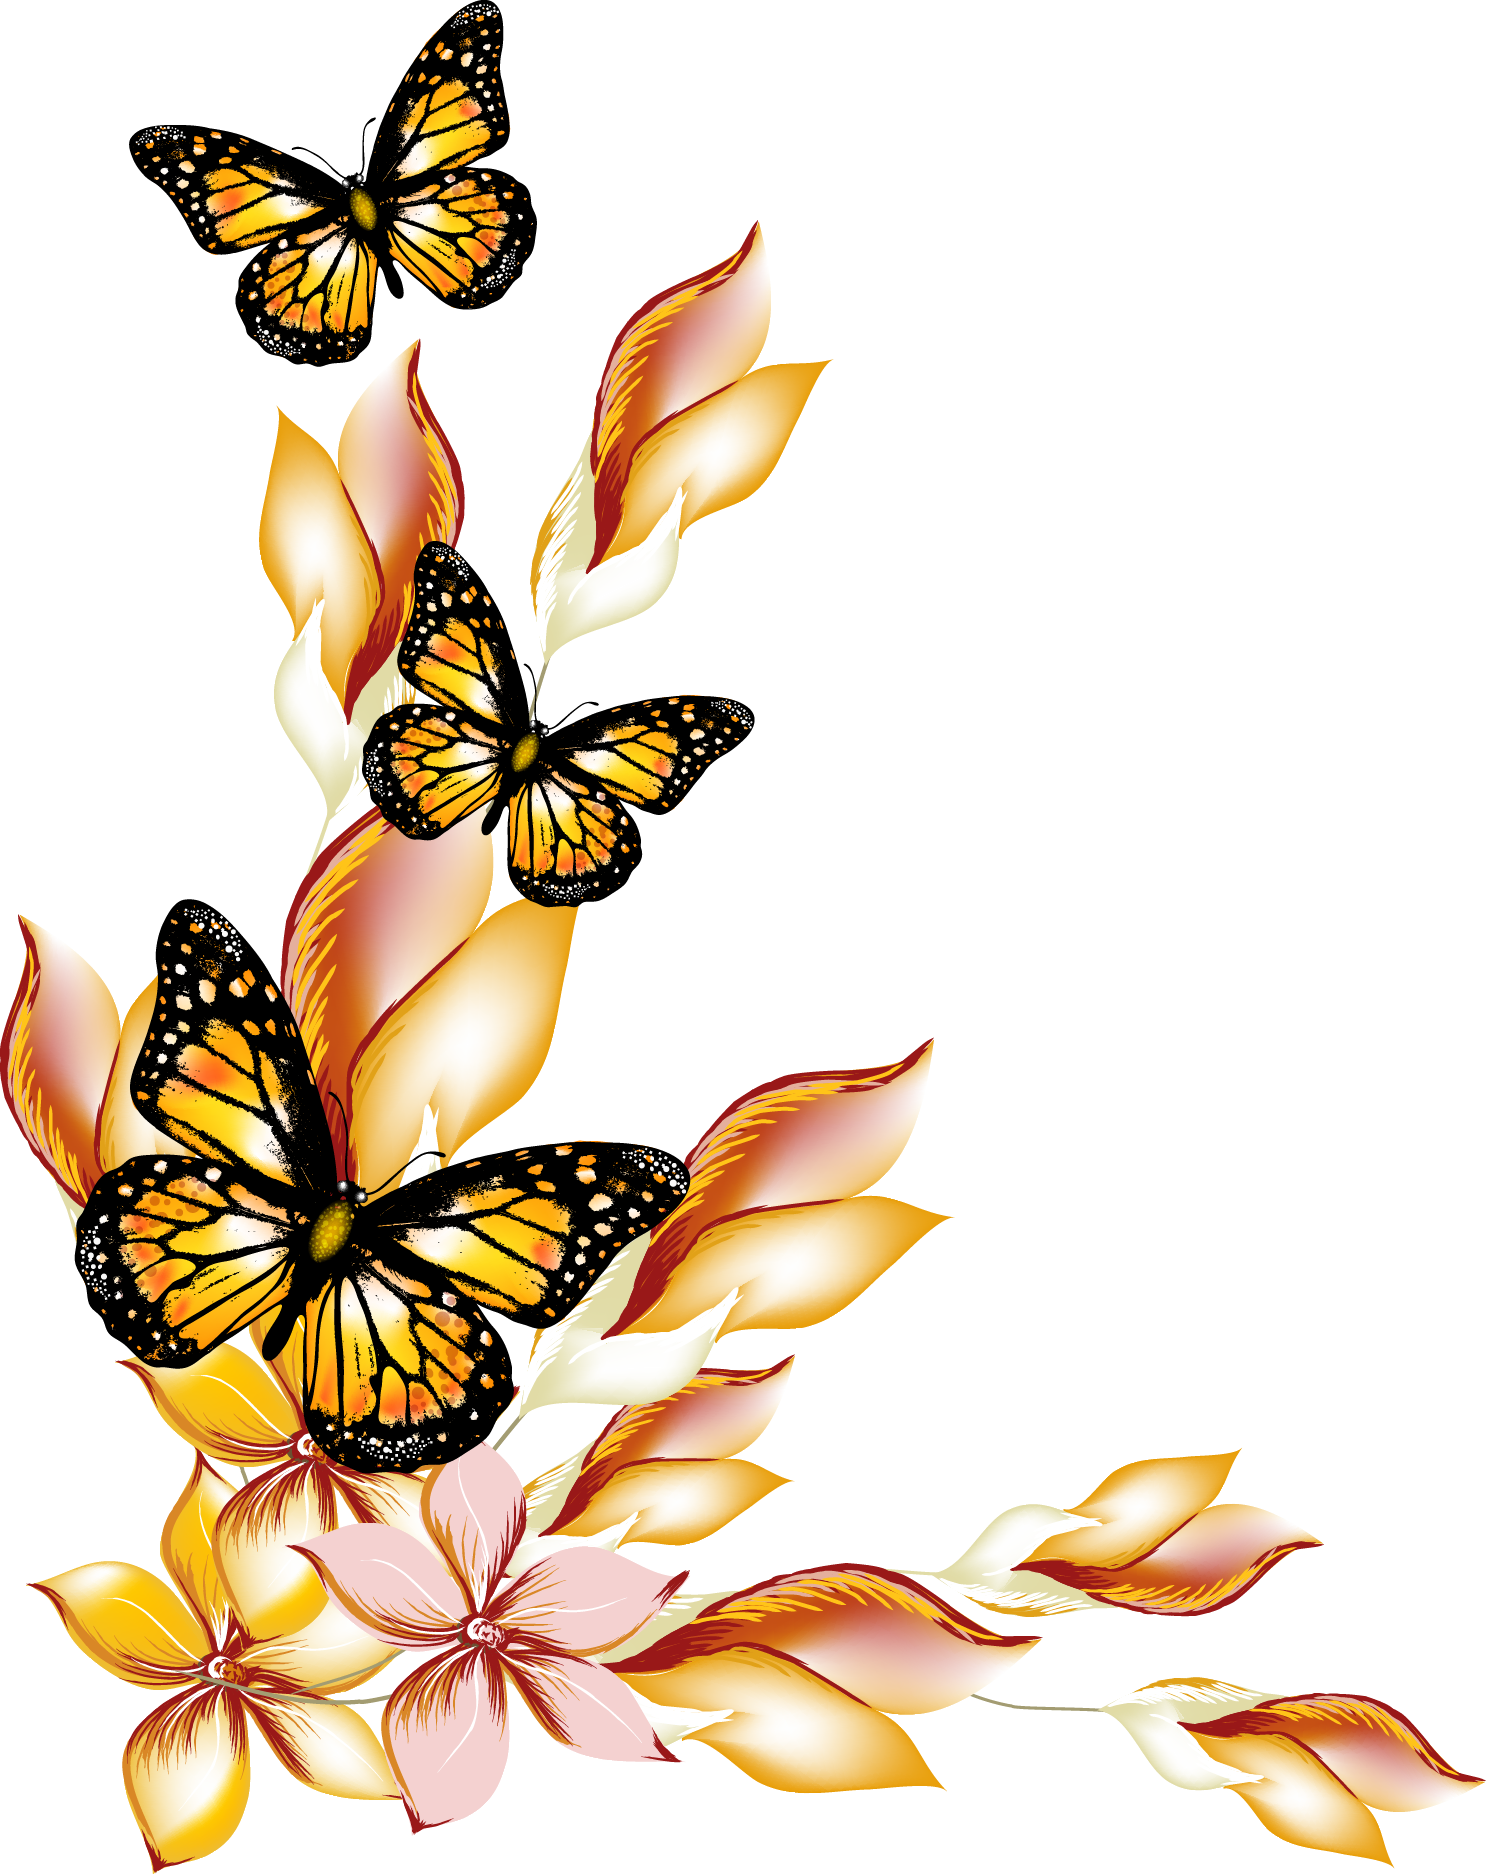 Butterfly Flower Border Design Free Transparent Clipart Clipartkey My